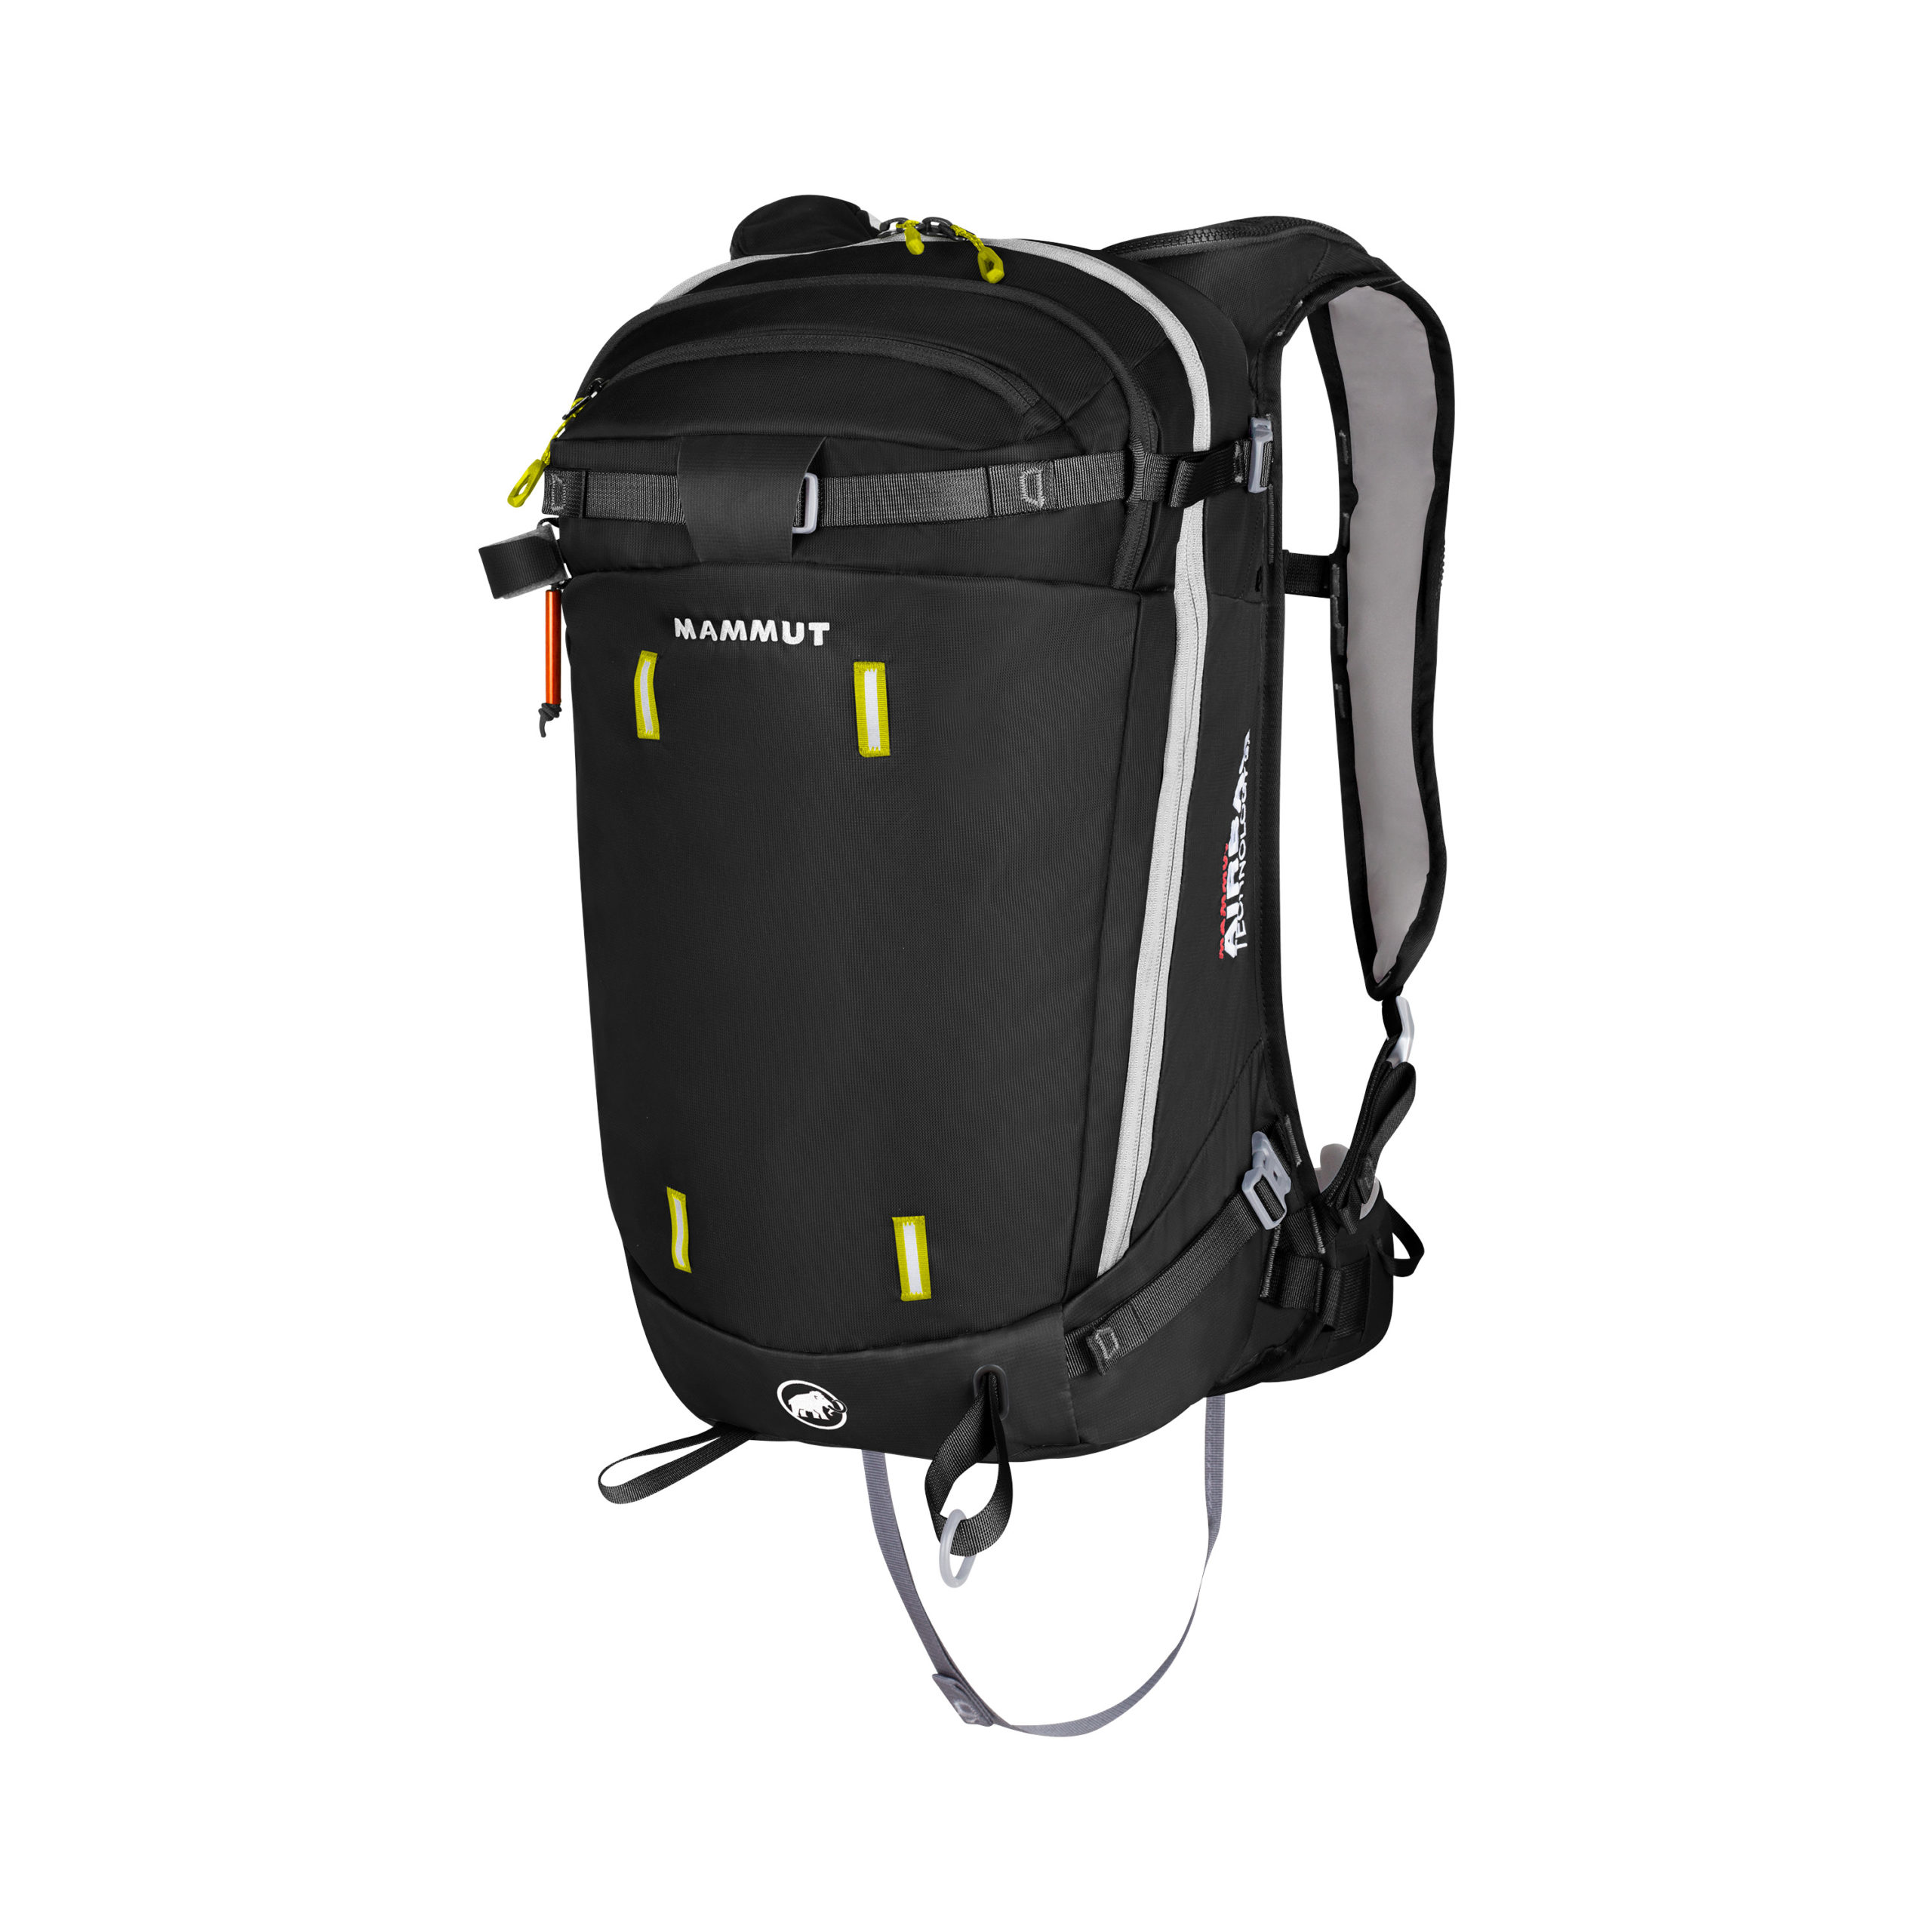 Mammut Barryvox Package avalanche kit